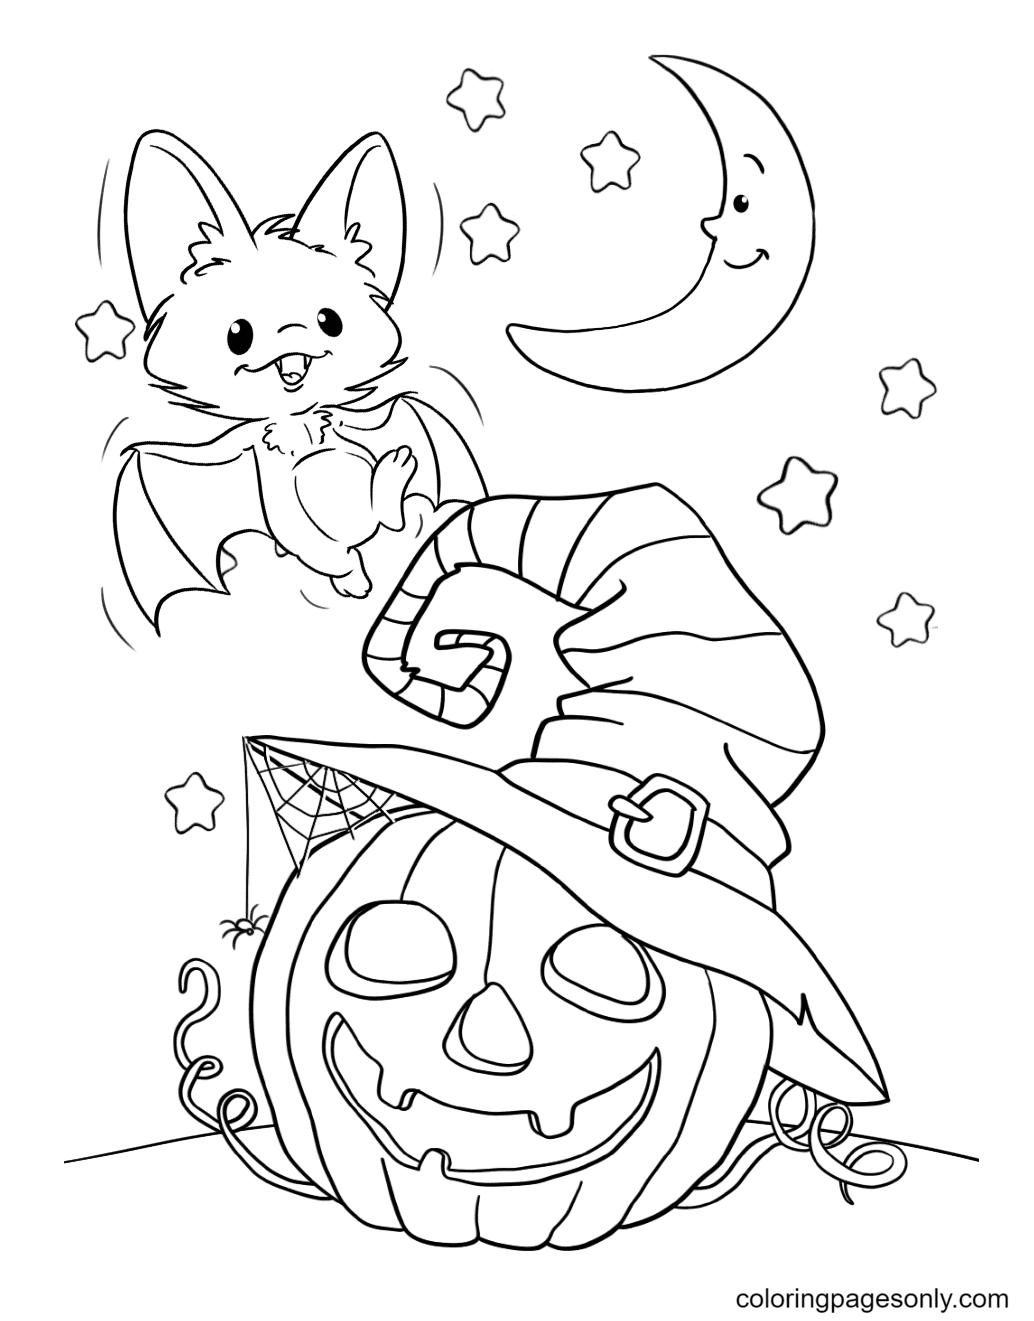 Halloween bats coloring pages printable for free download